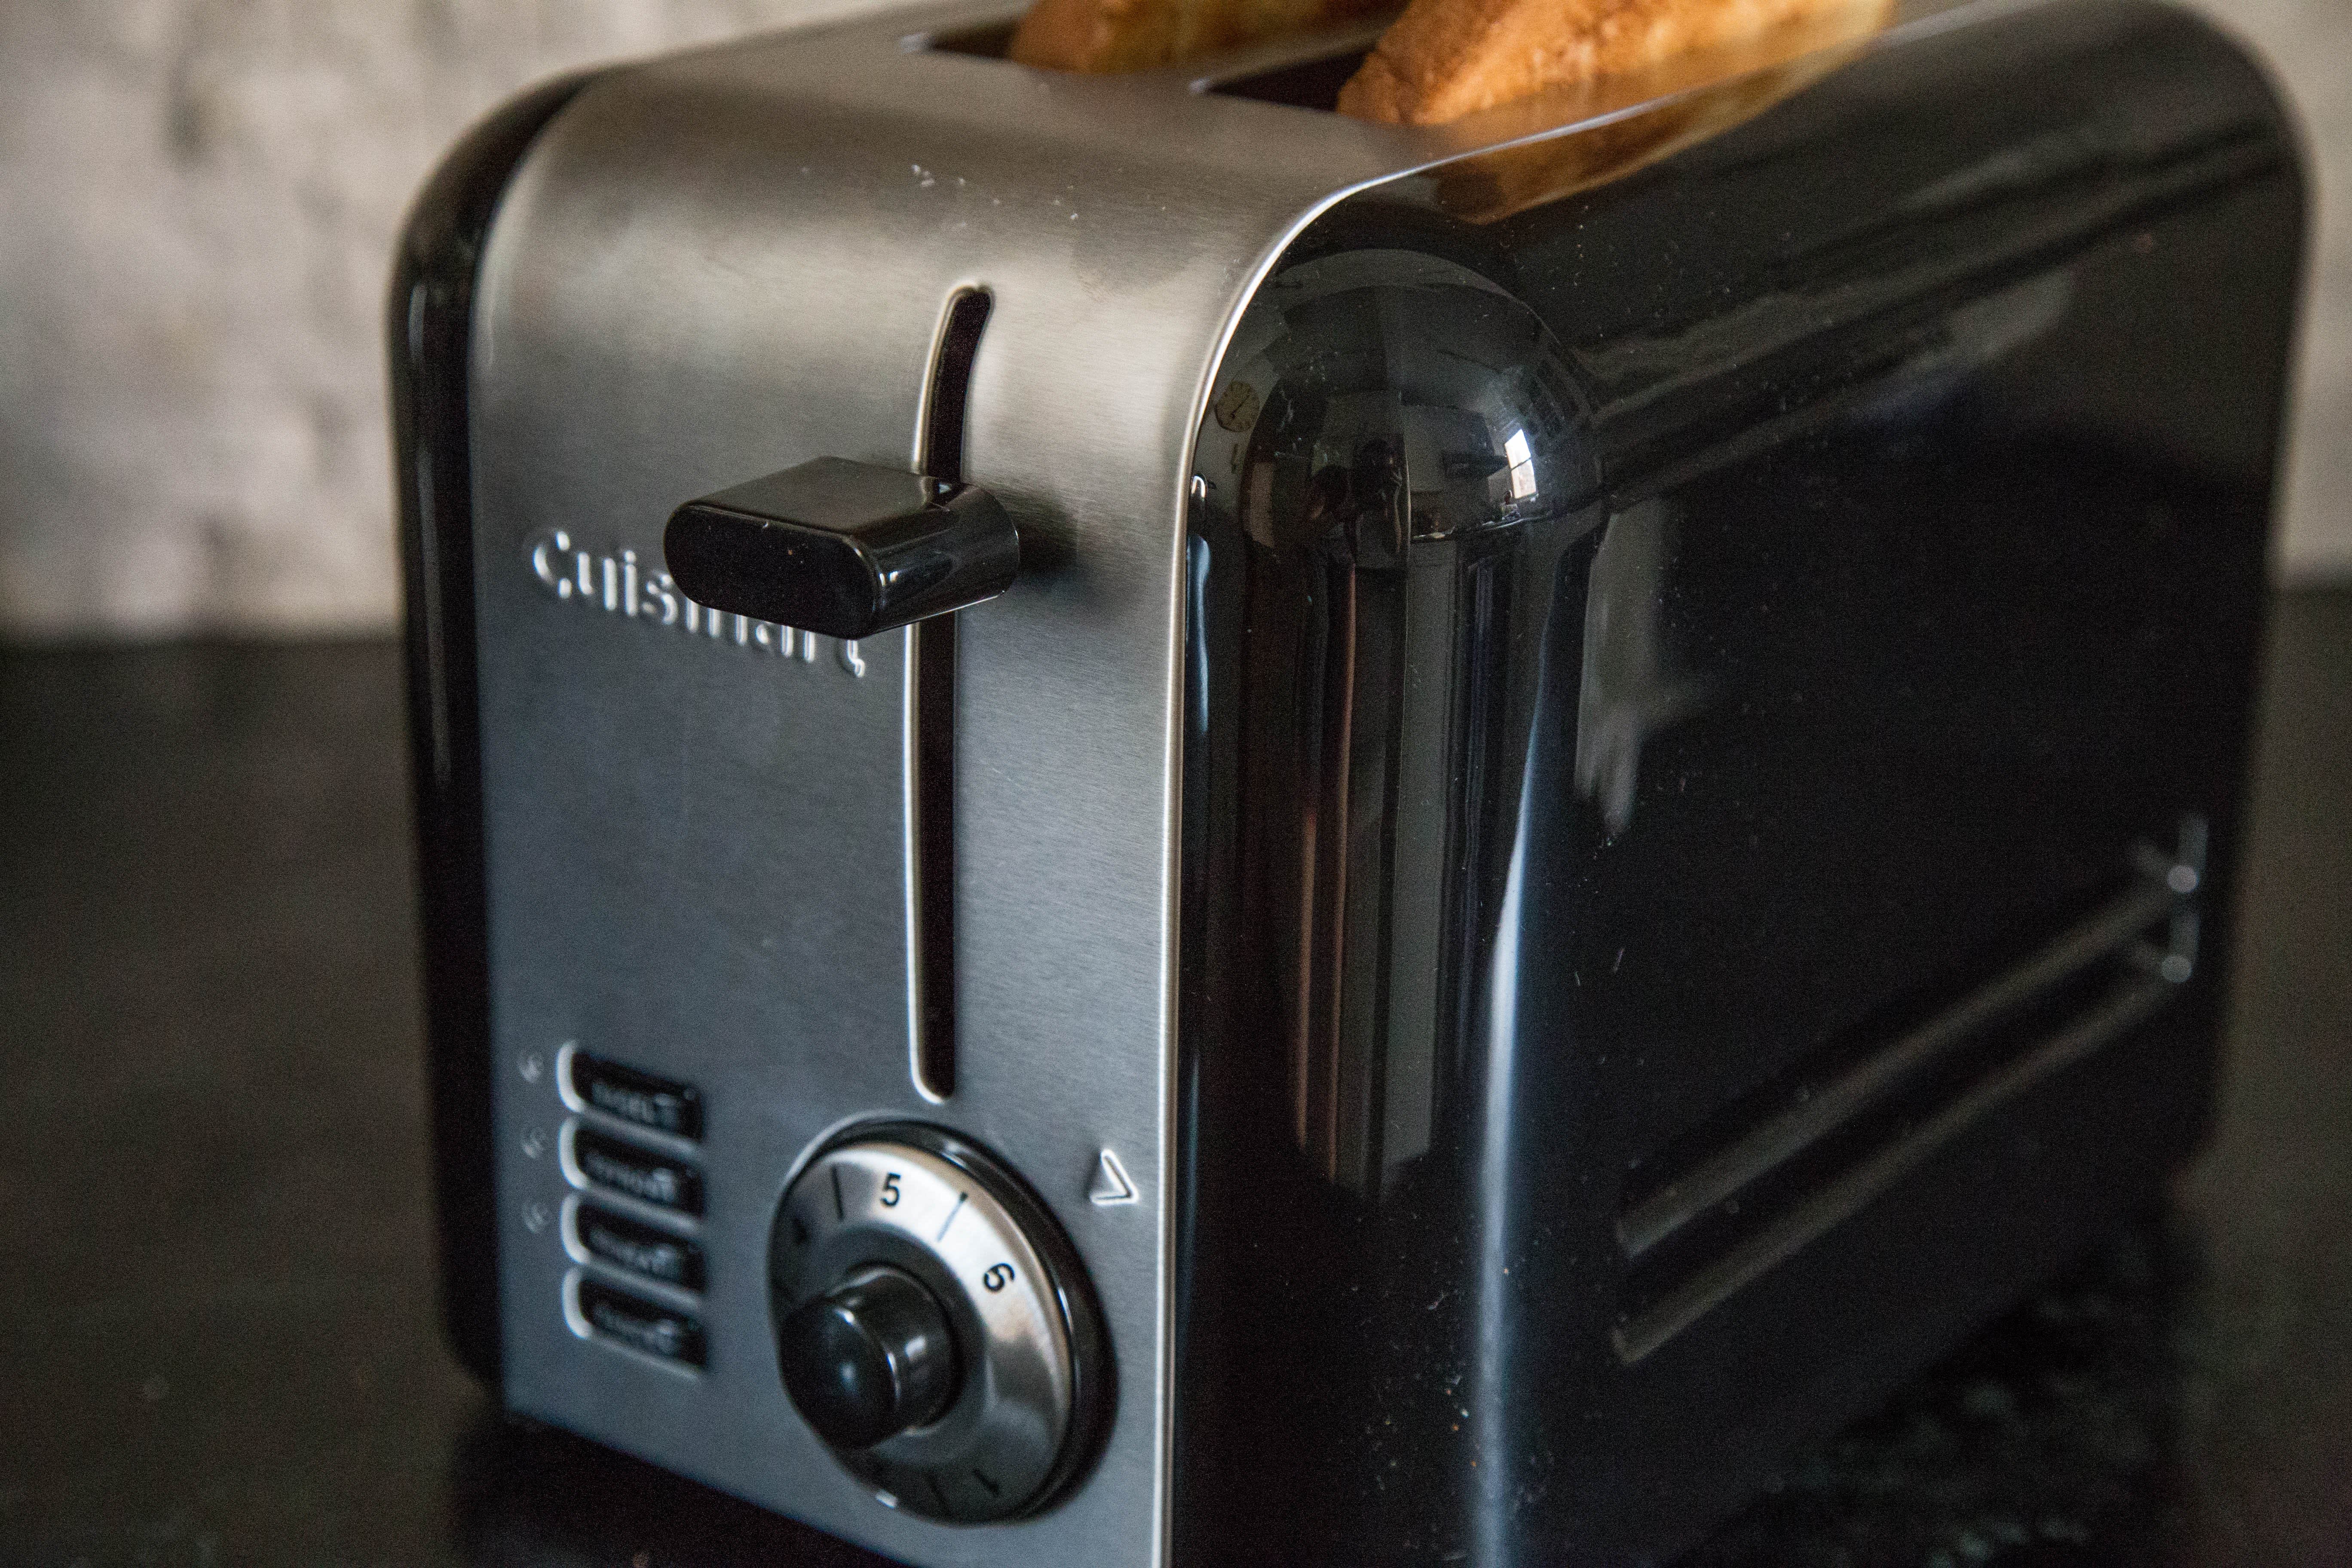  Cuisinart CPT-320P1 Compact Stainless 2-Slice Toaster